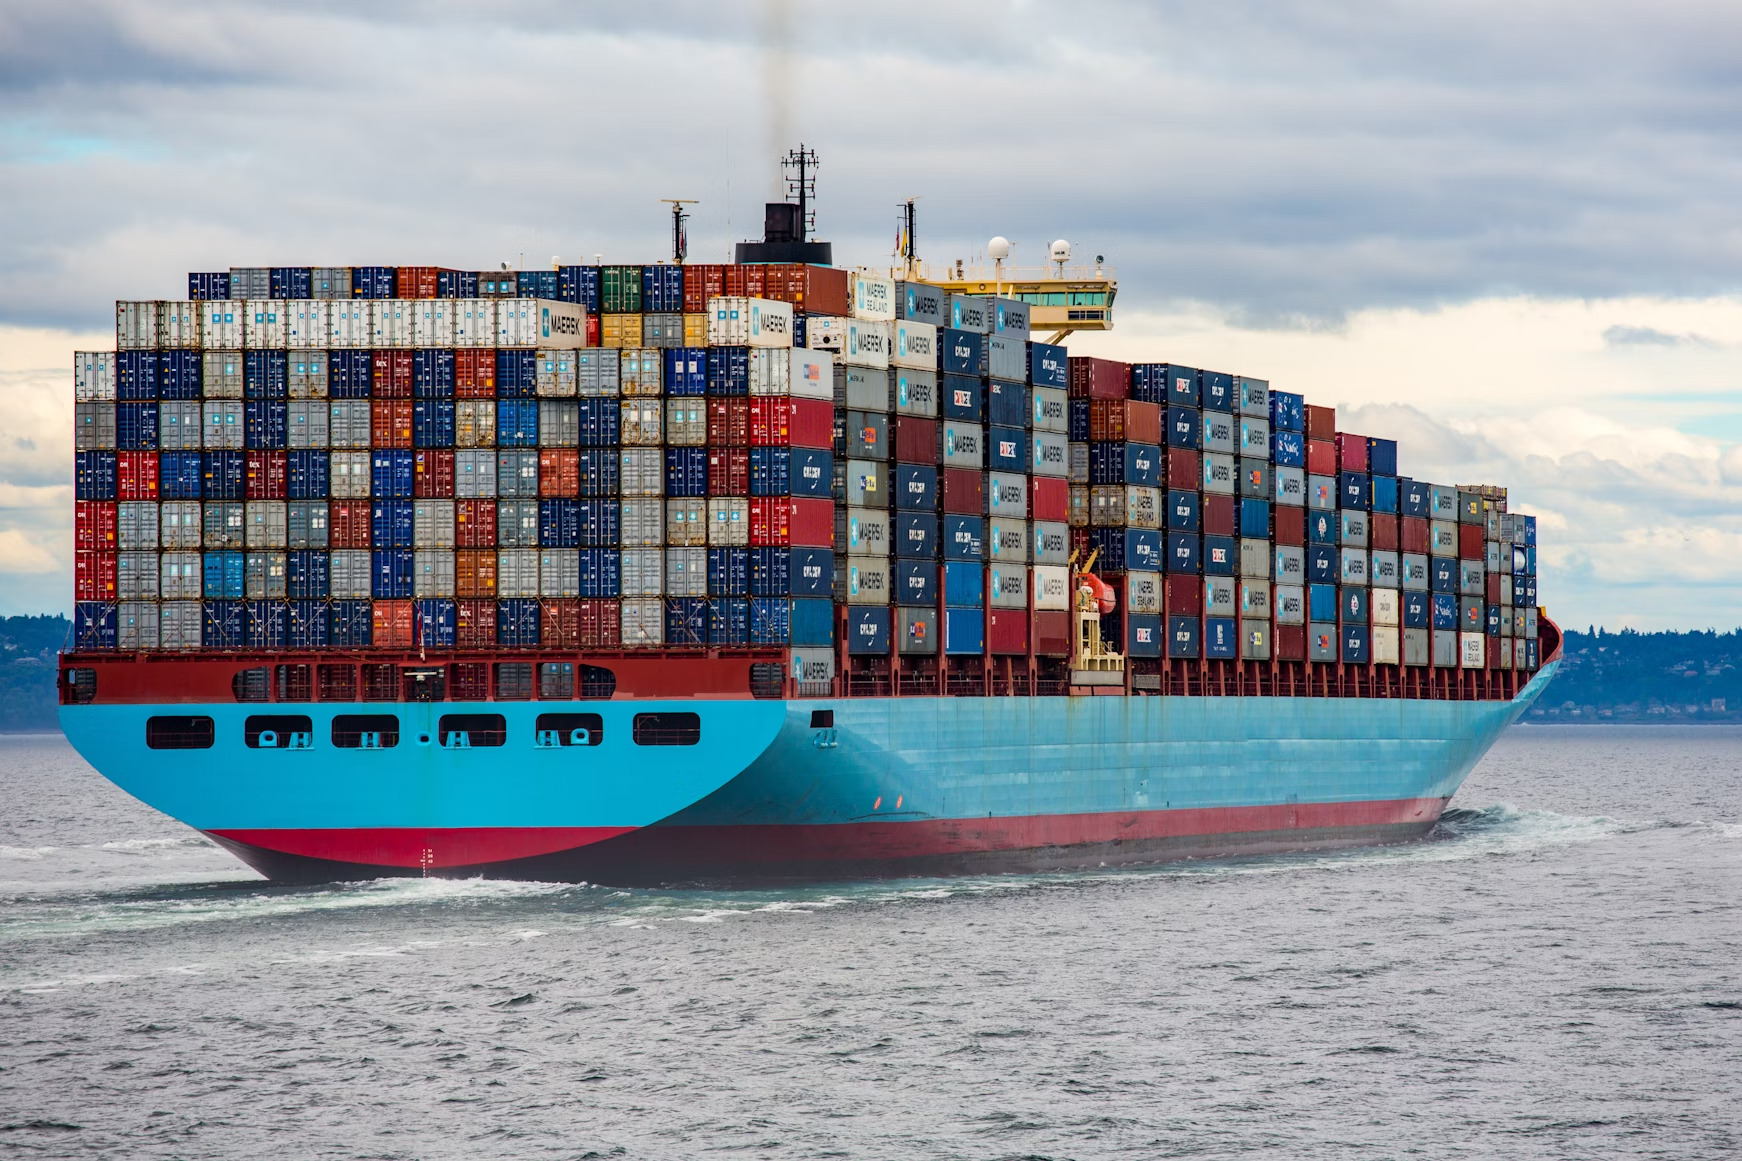 A ship with containers.